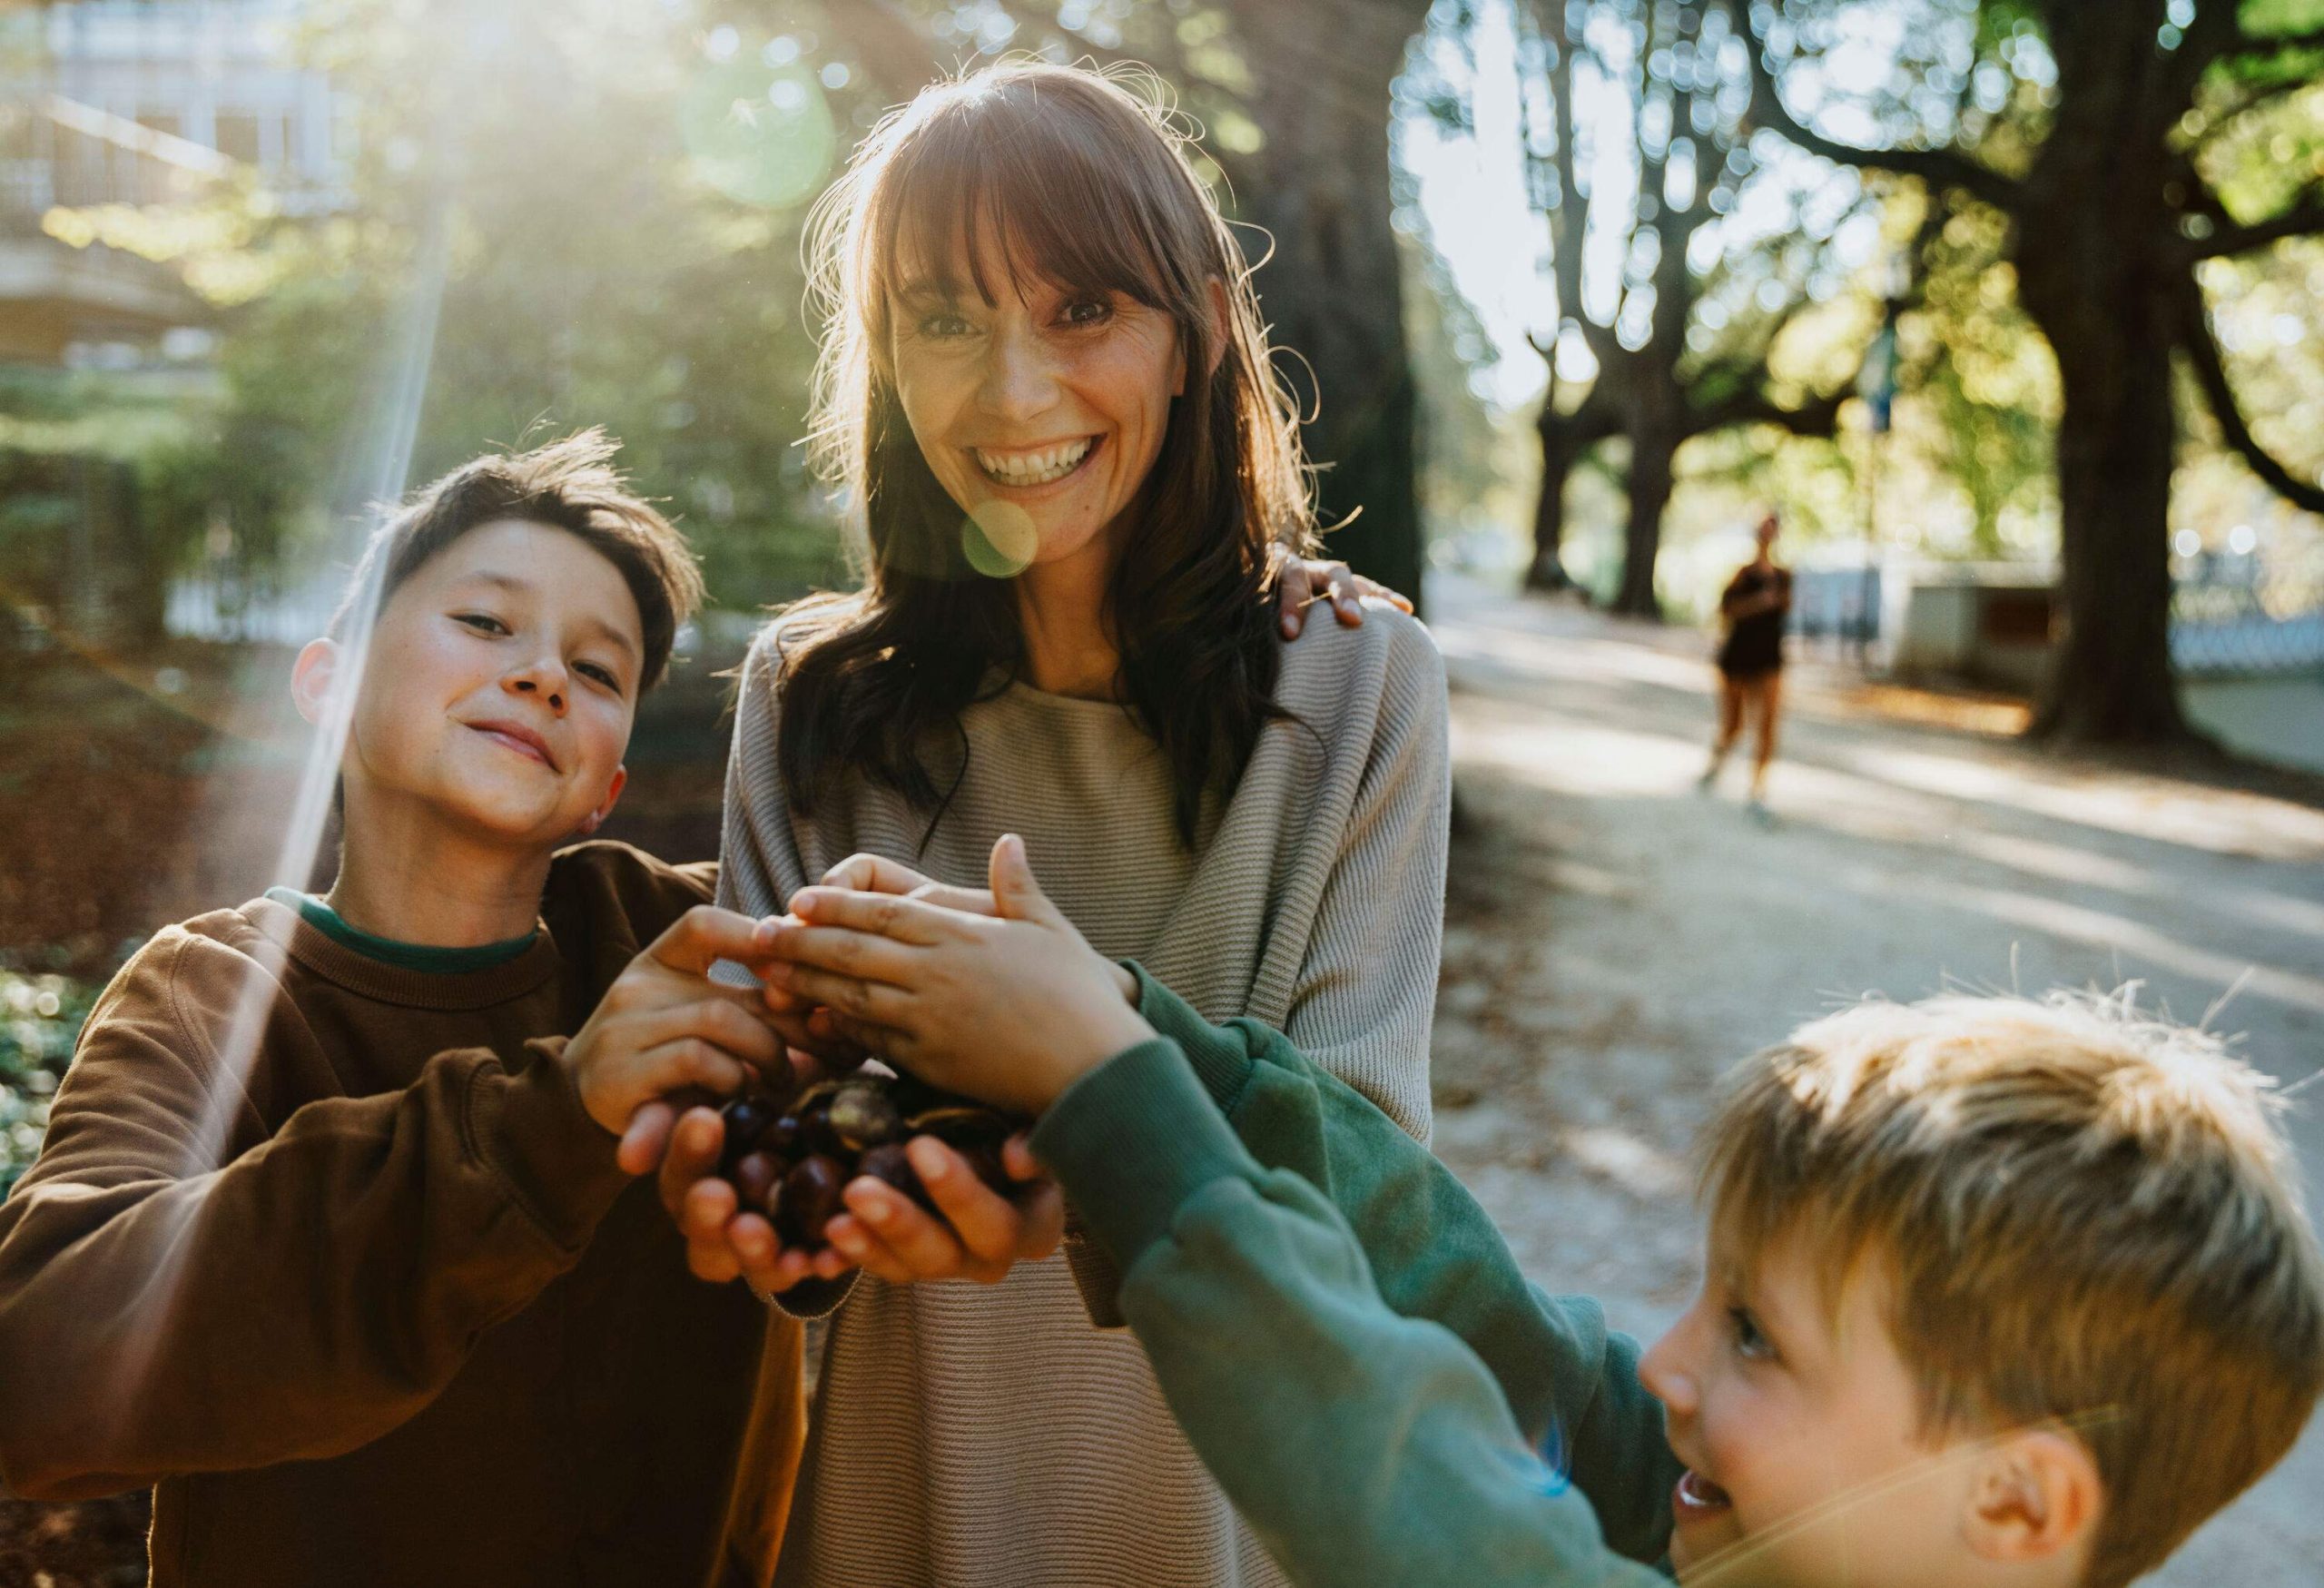 A mature woman and two young boys collecting chestnuts on a crisp autumn day.